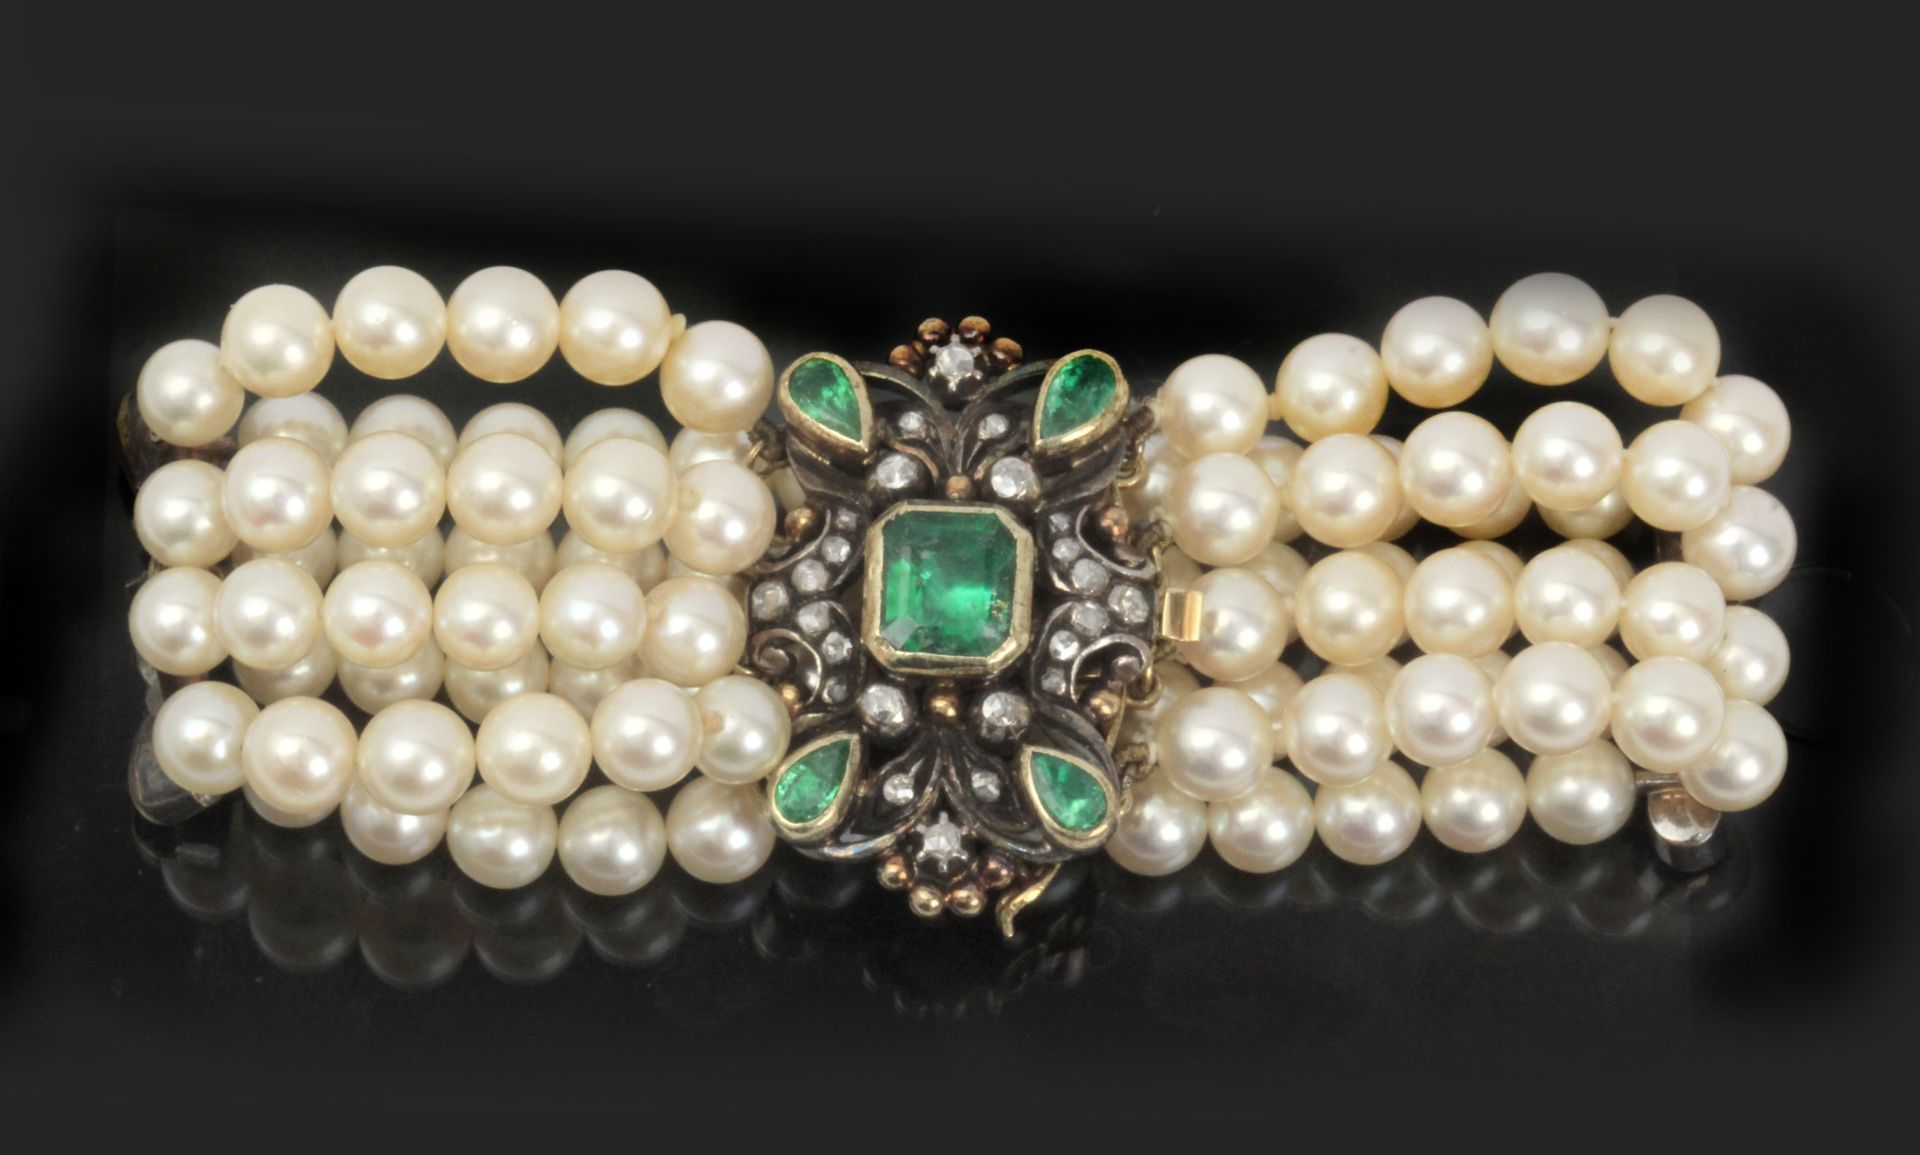 A four strand cultured pearl bracelet with a silver and gold clasp mounted with emeralds